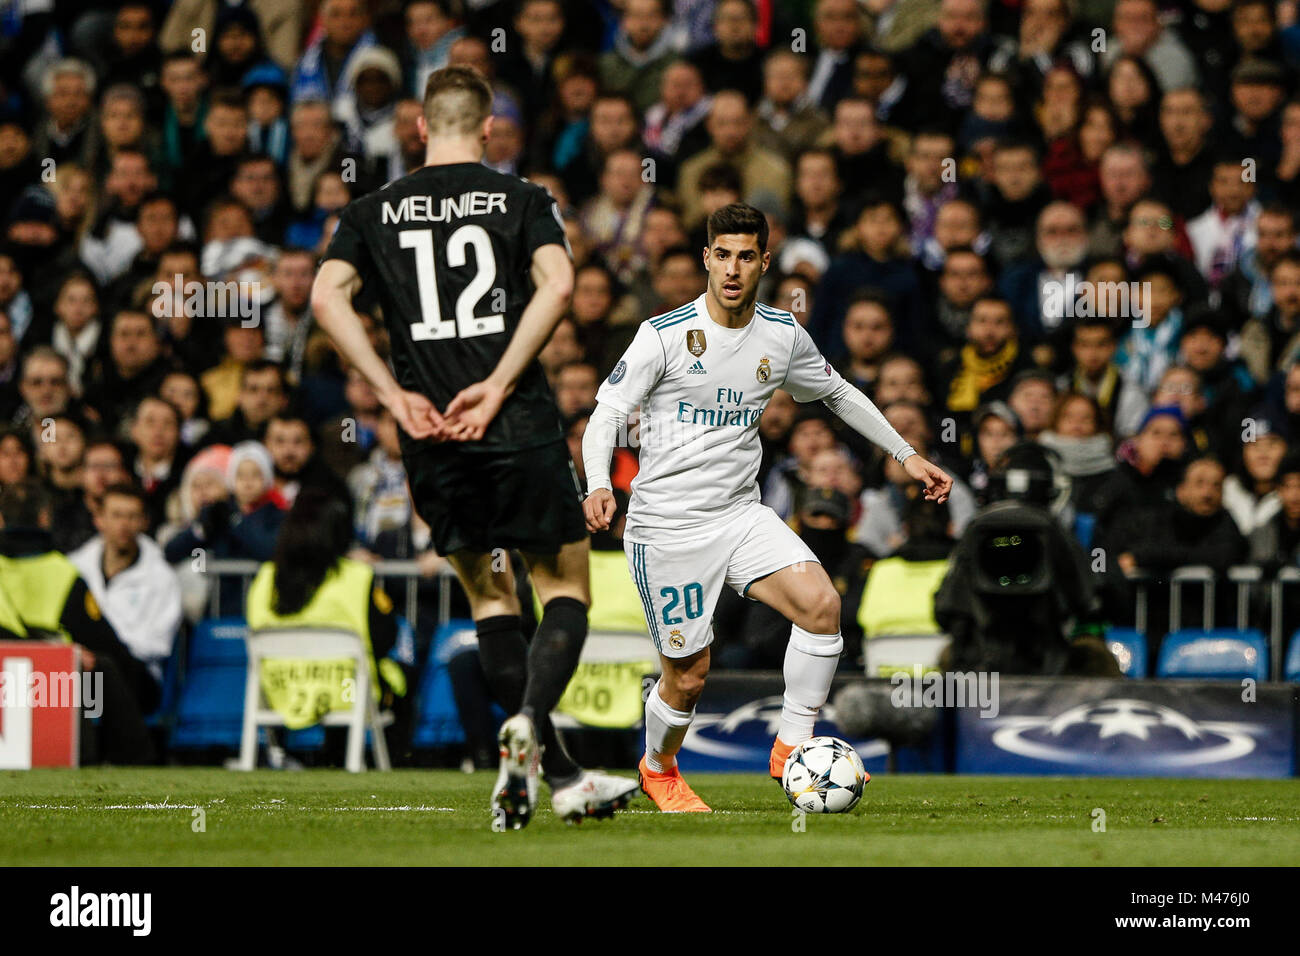 Marco Asensio (Real Madrid) drives forward on the ball Thomas Meunier (PSG), UCL Champions League match between Real Madrid vs PSG at the Santiago Bernabeu stadium in Madrid, Spain, February 14, 2018. Credit: Gtres Información más Comuniación on line, S.L./Alamy Live News Stock Photo